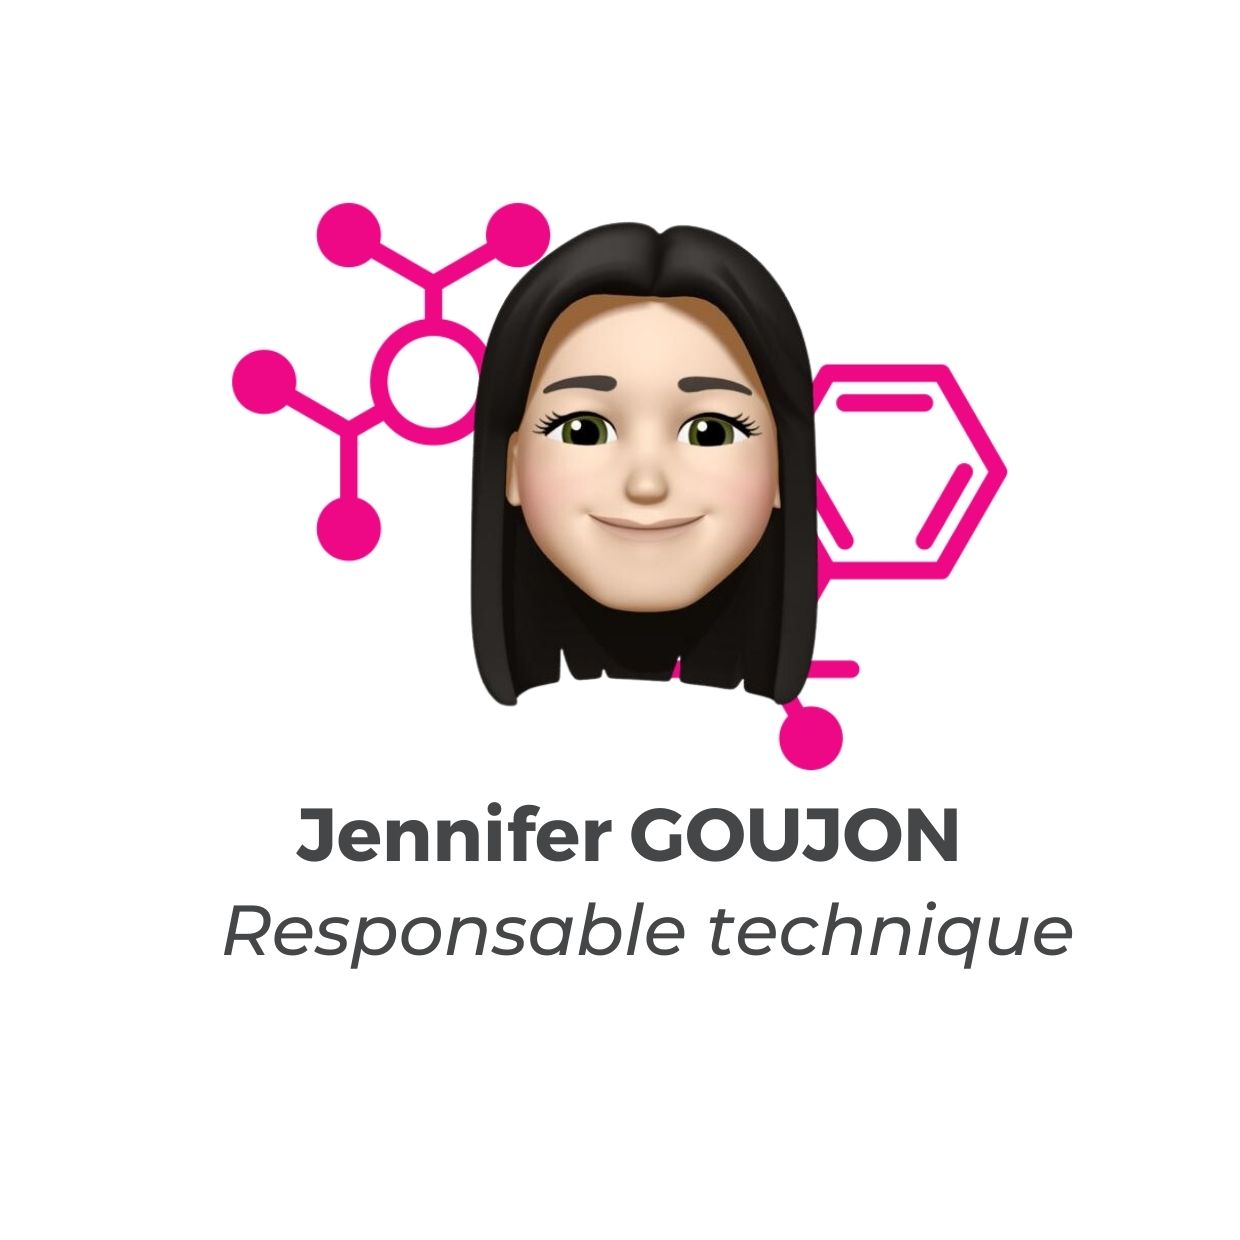 Jennifer Goujon  - Technical Manager - Analytical Project Manager  @Polymex